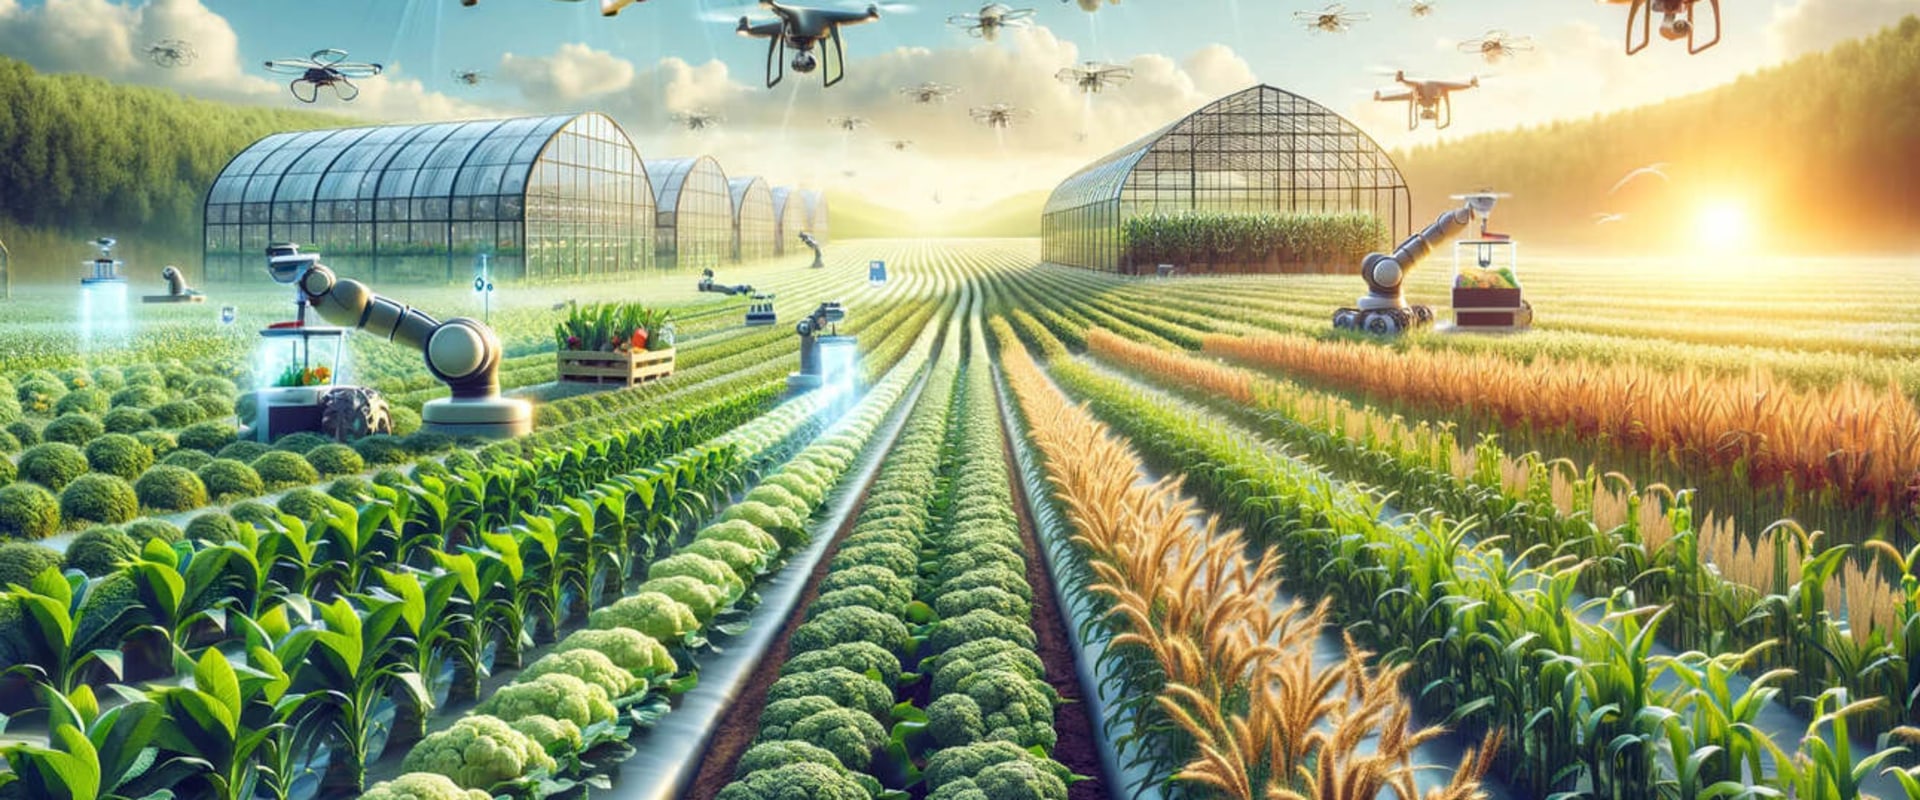 The Impact of Technology on Sustainable Farming